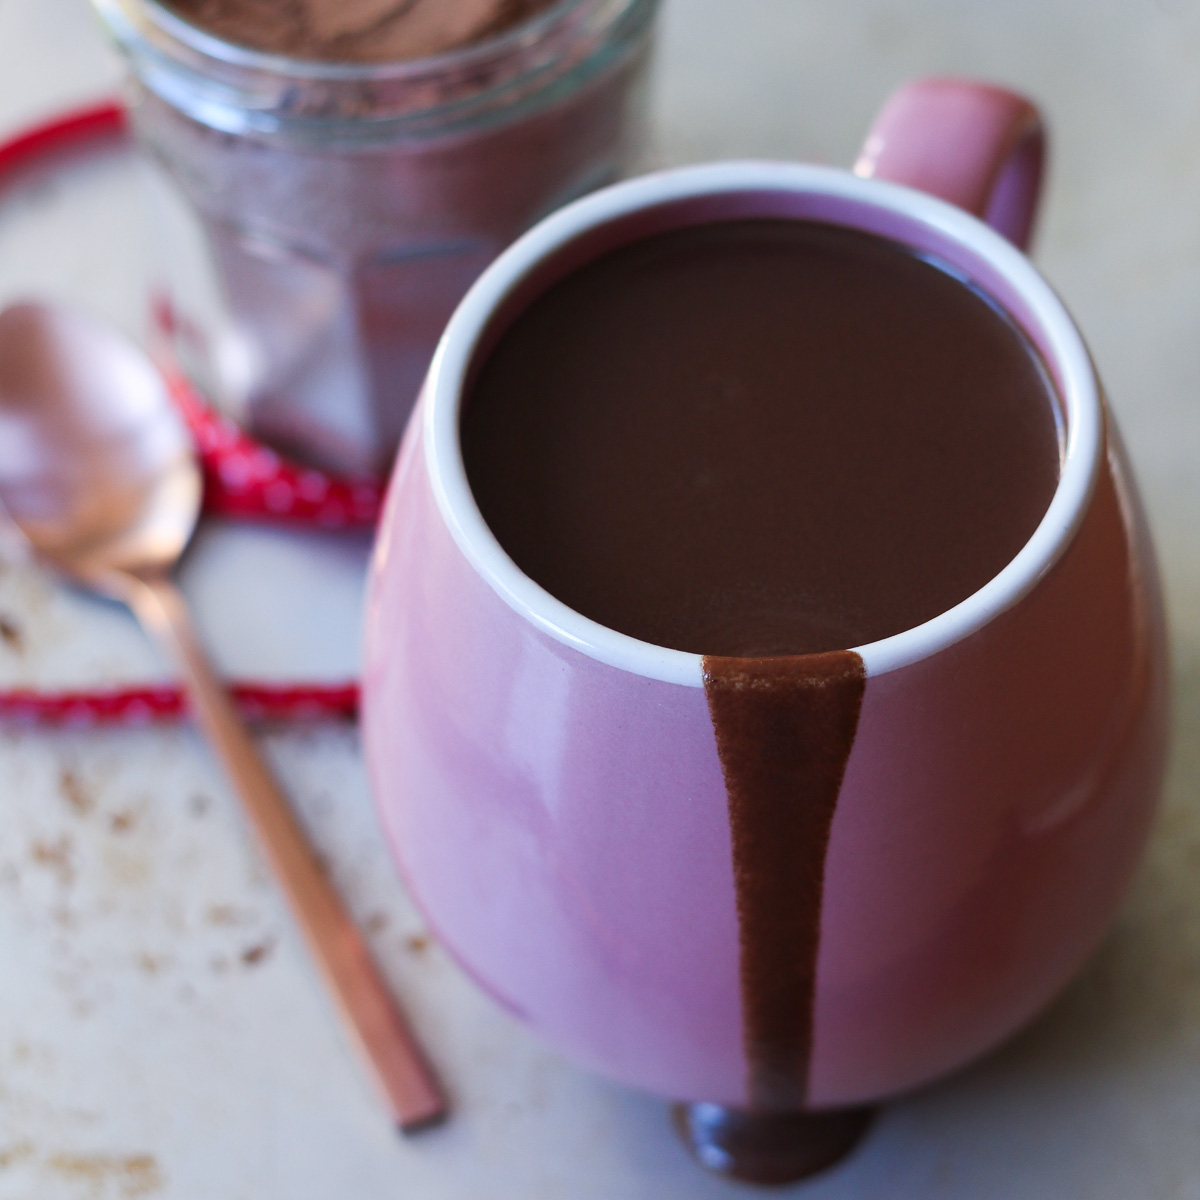 Close up image of hot chocolate in an oversized pink mug, with a drizzle down the side.